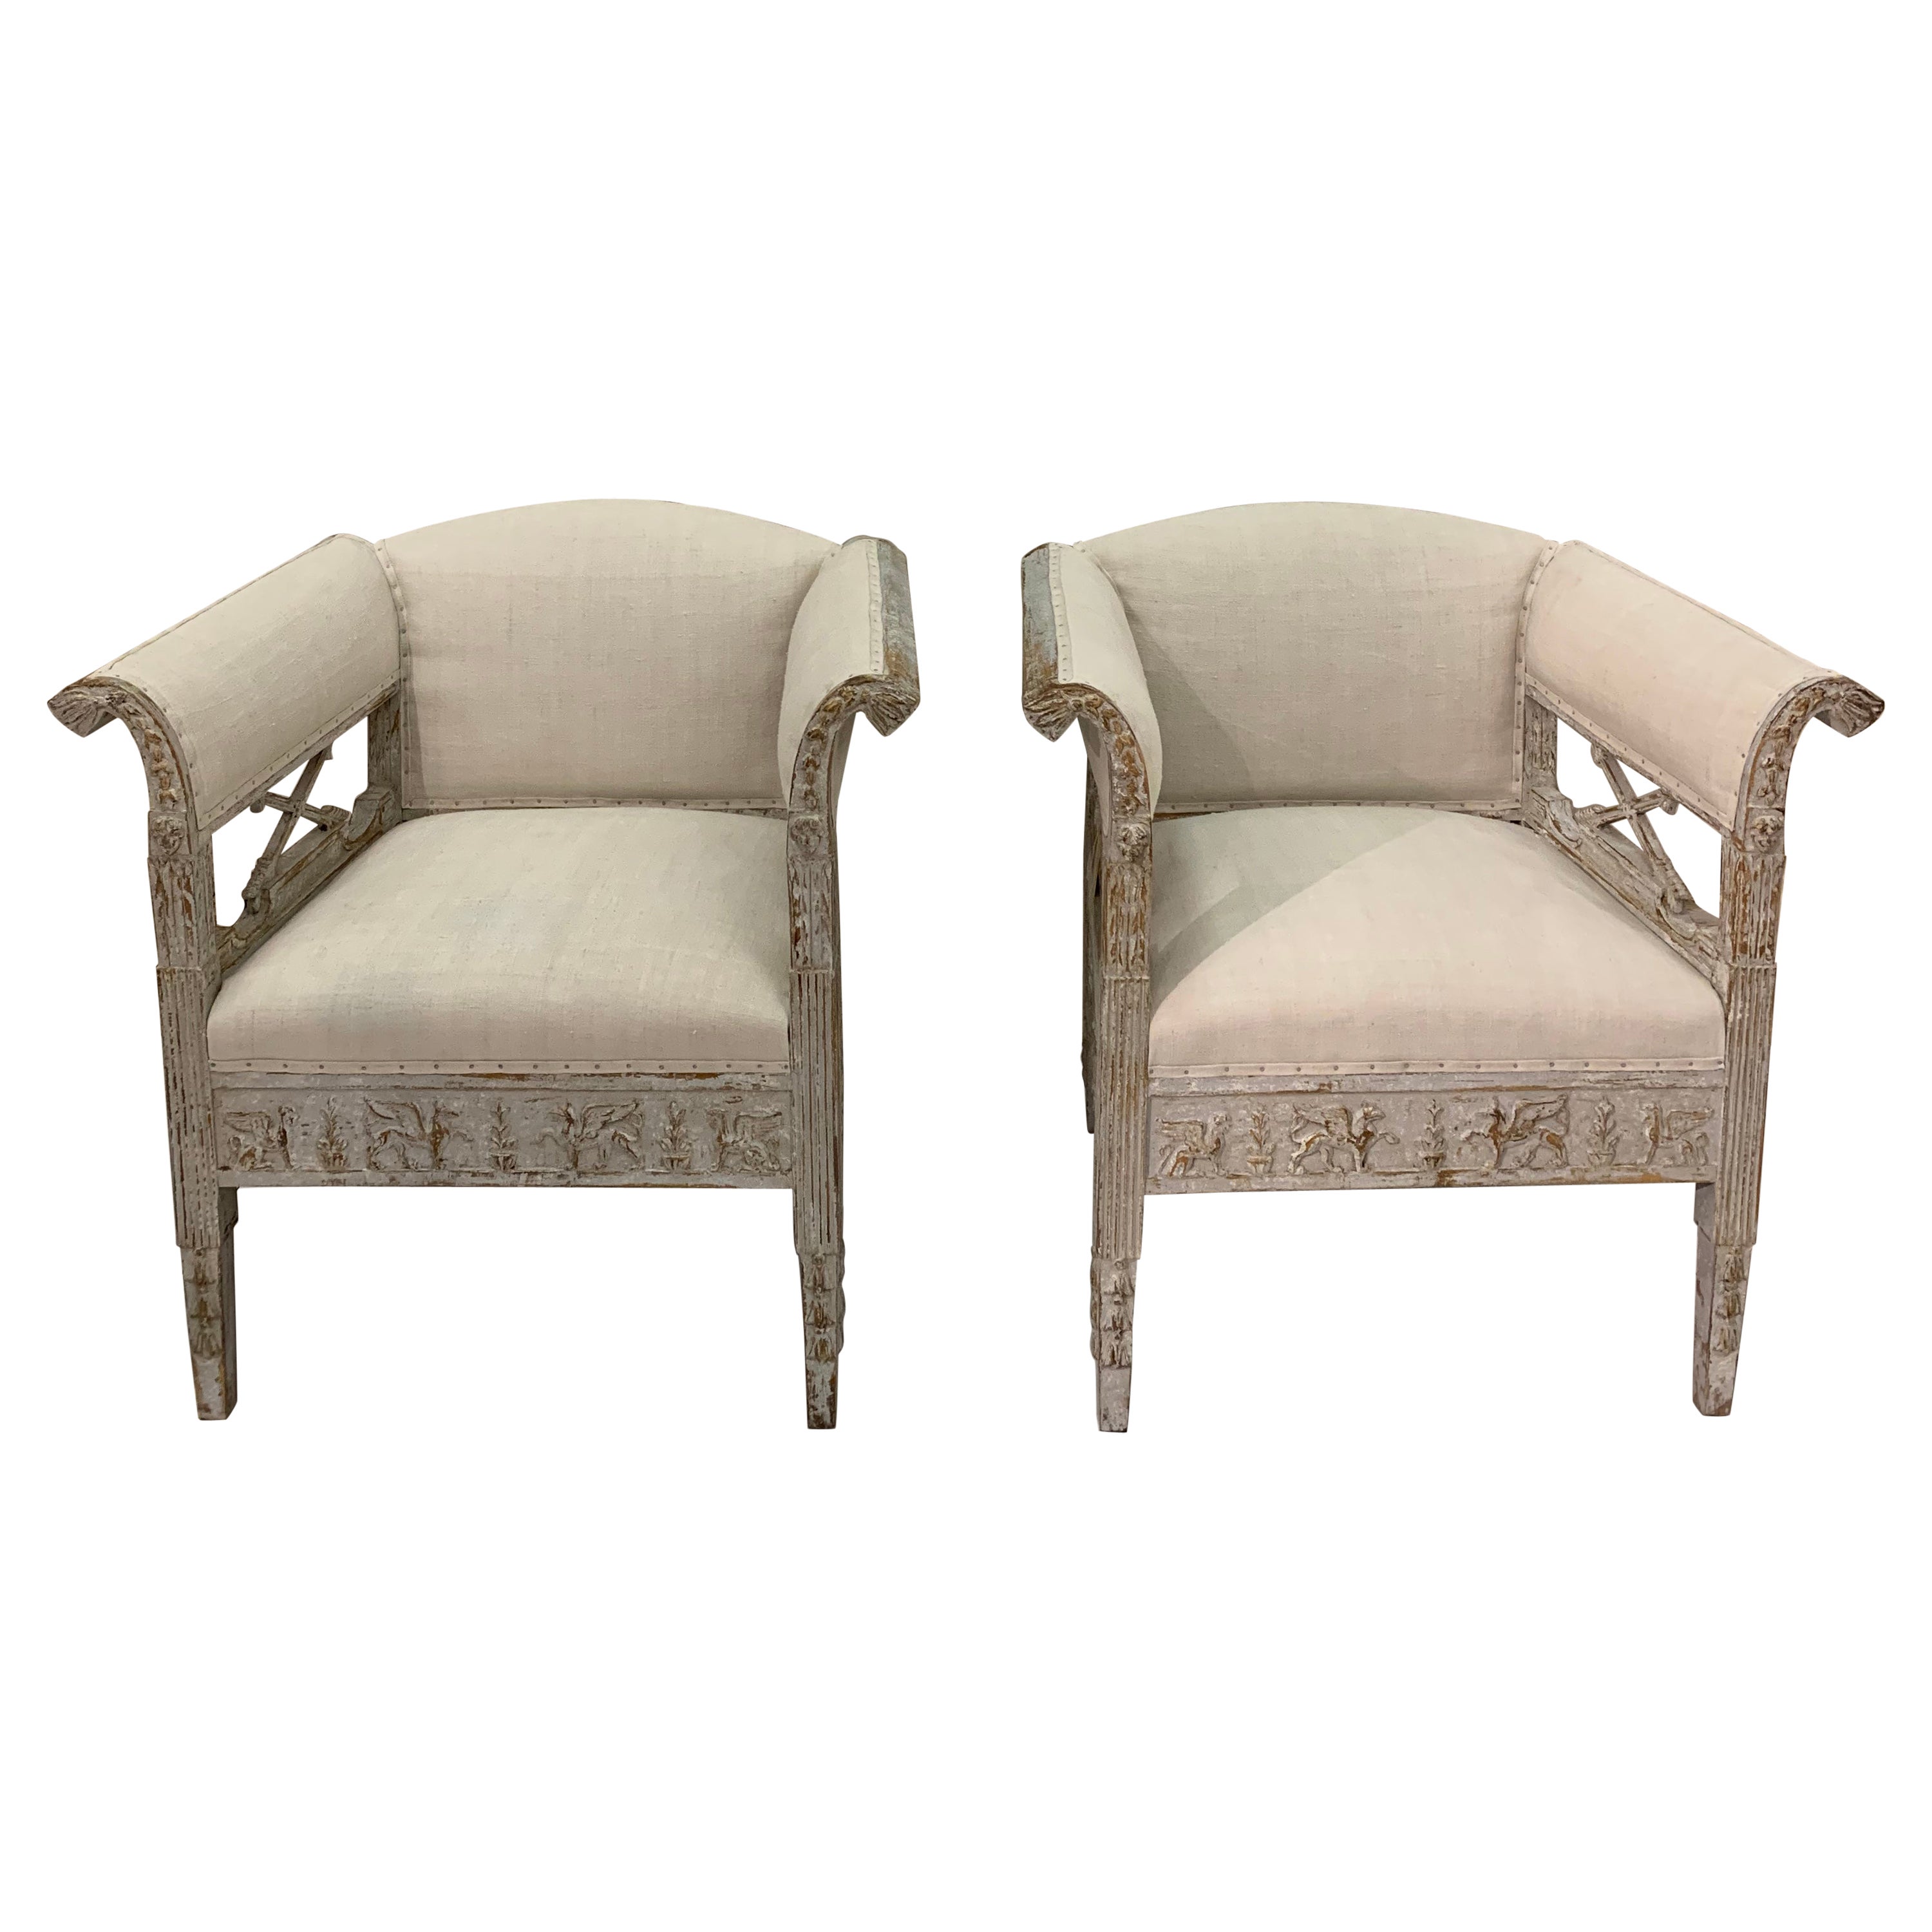 Pair of 1900s Swedish Neoclassical Decorated Painted & Upholstered Armchairs 